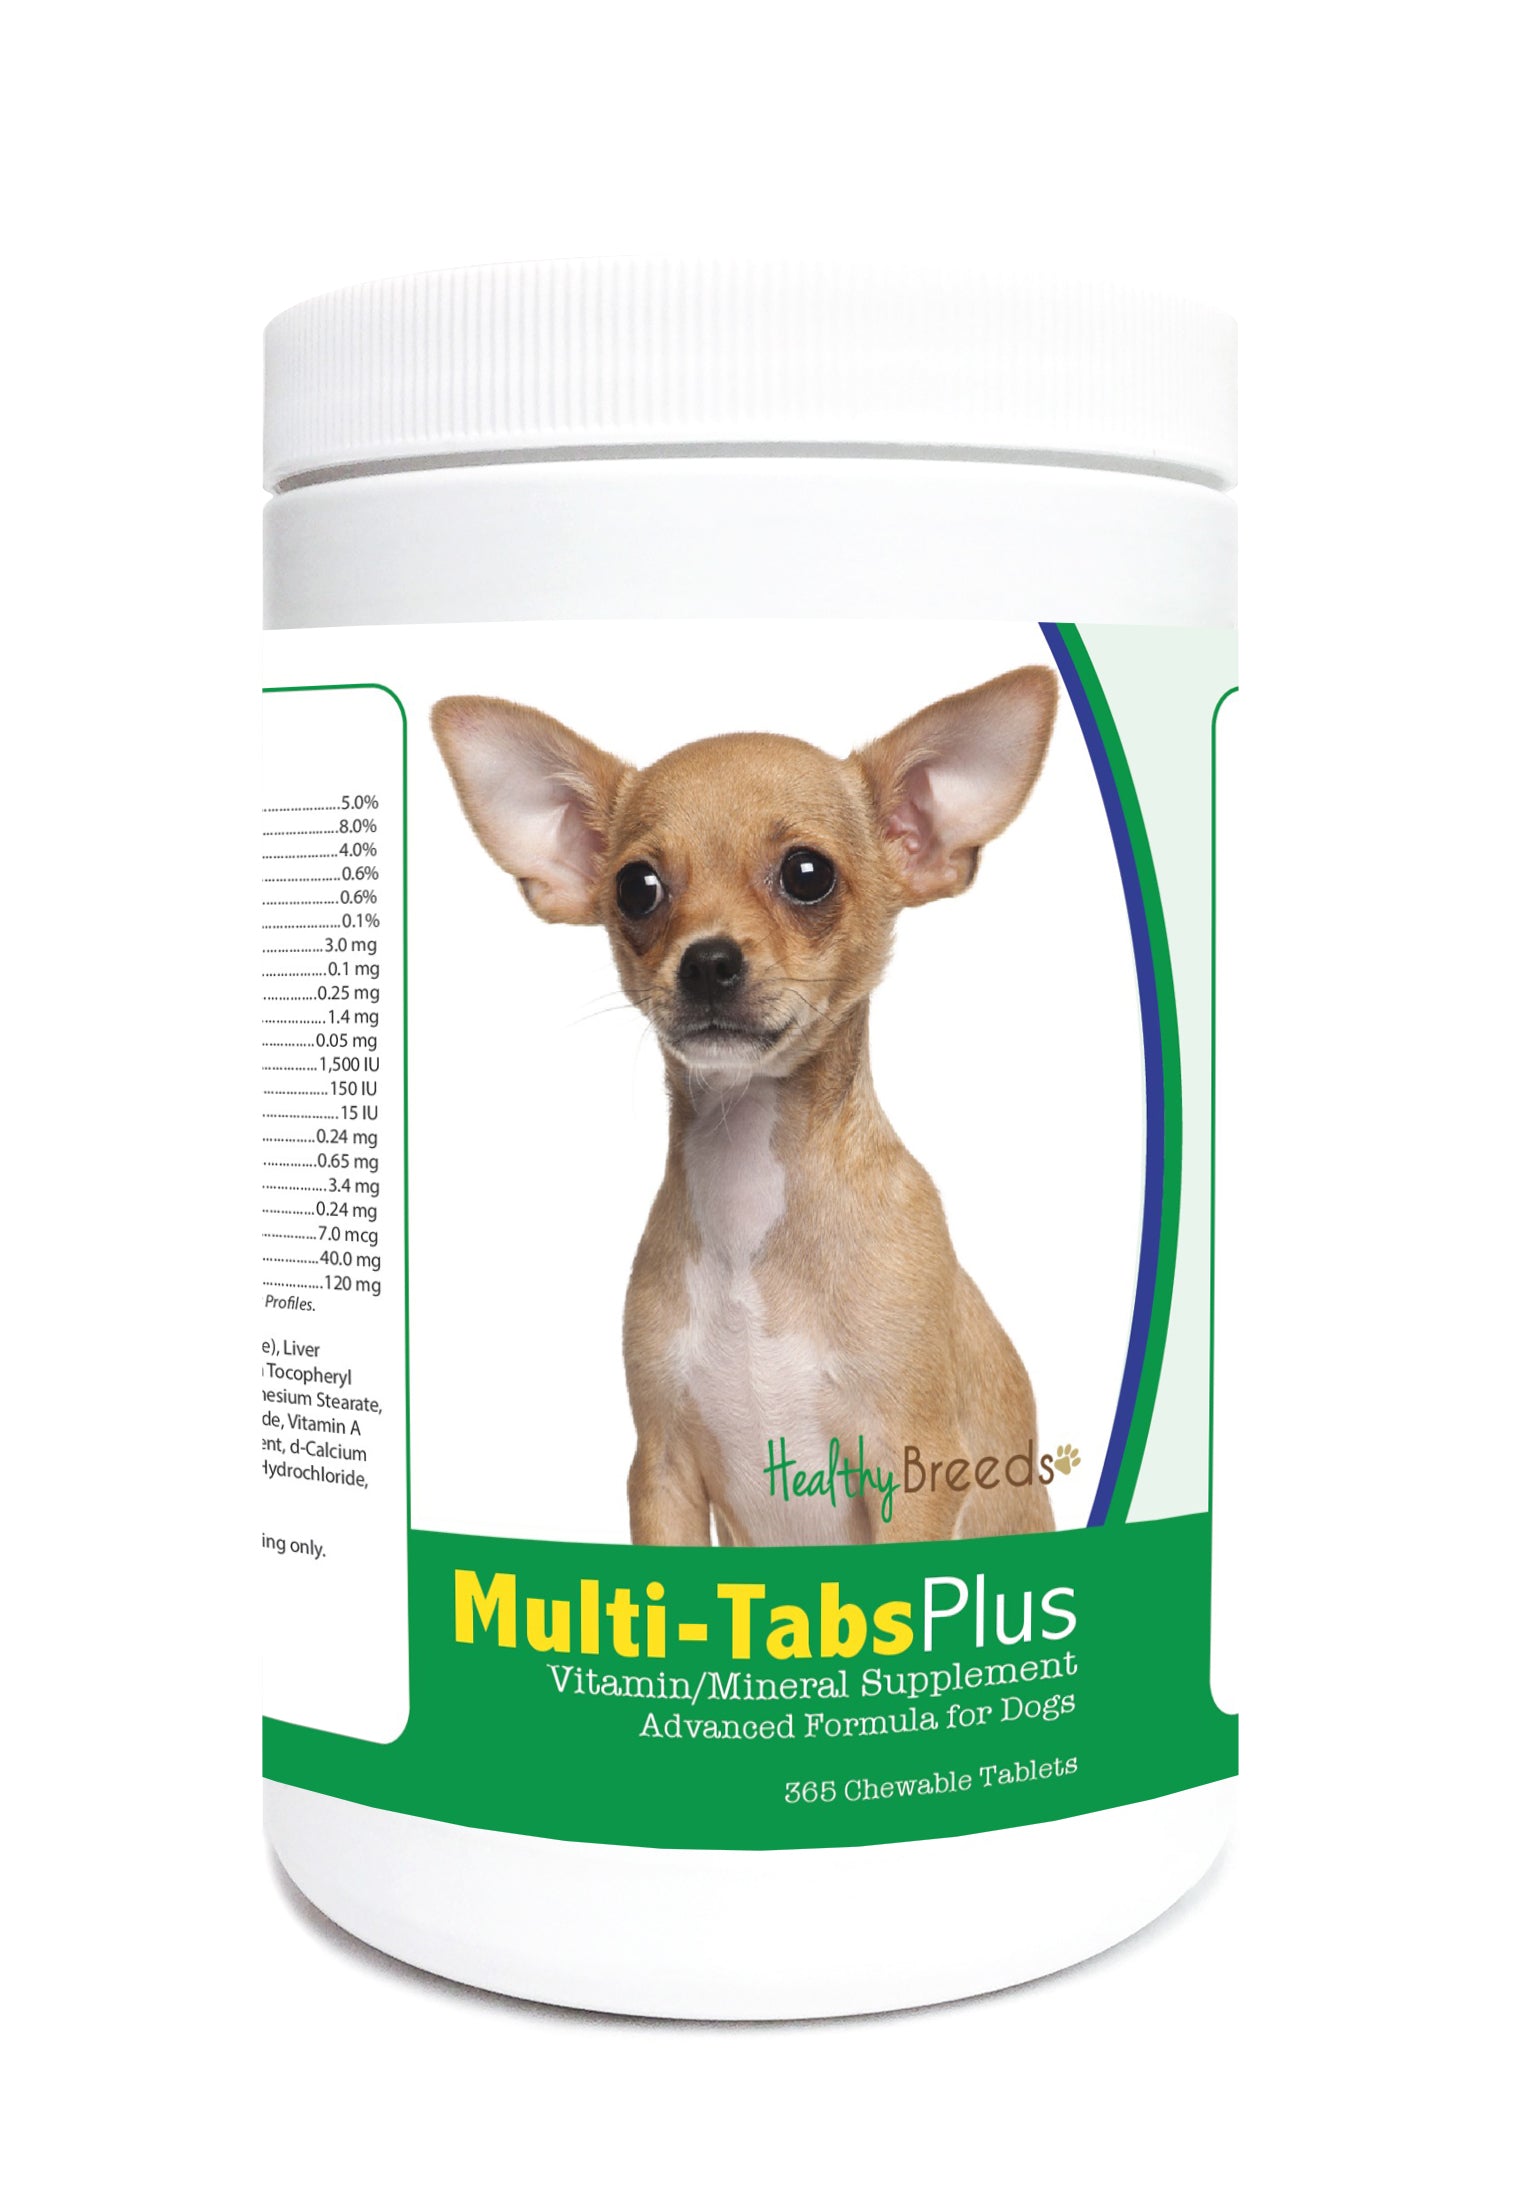 Chihuahua Multi-Tabs Plus Chewable Tablets 365 Count